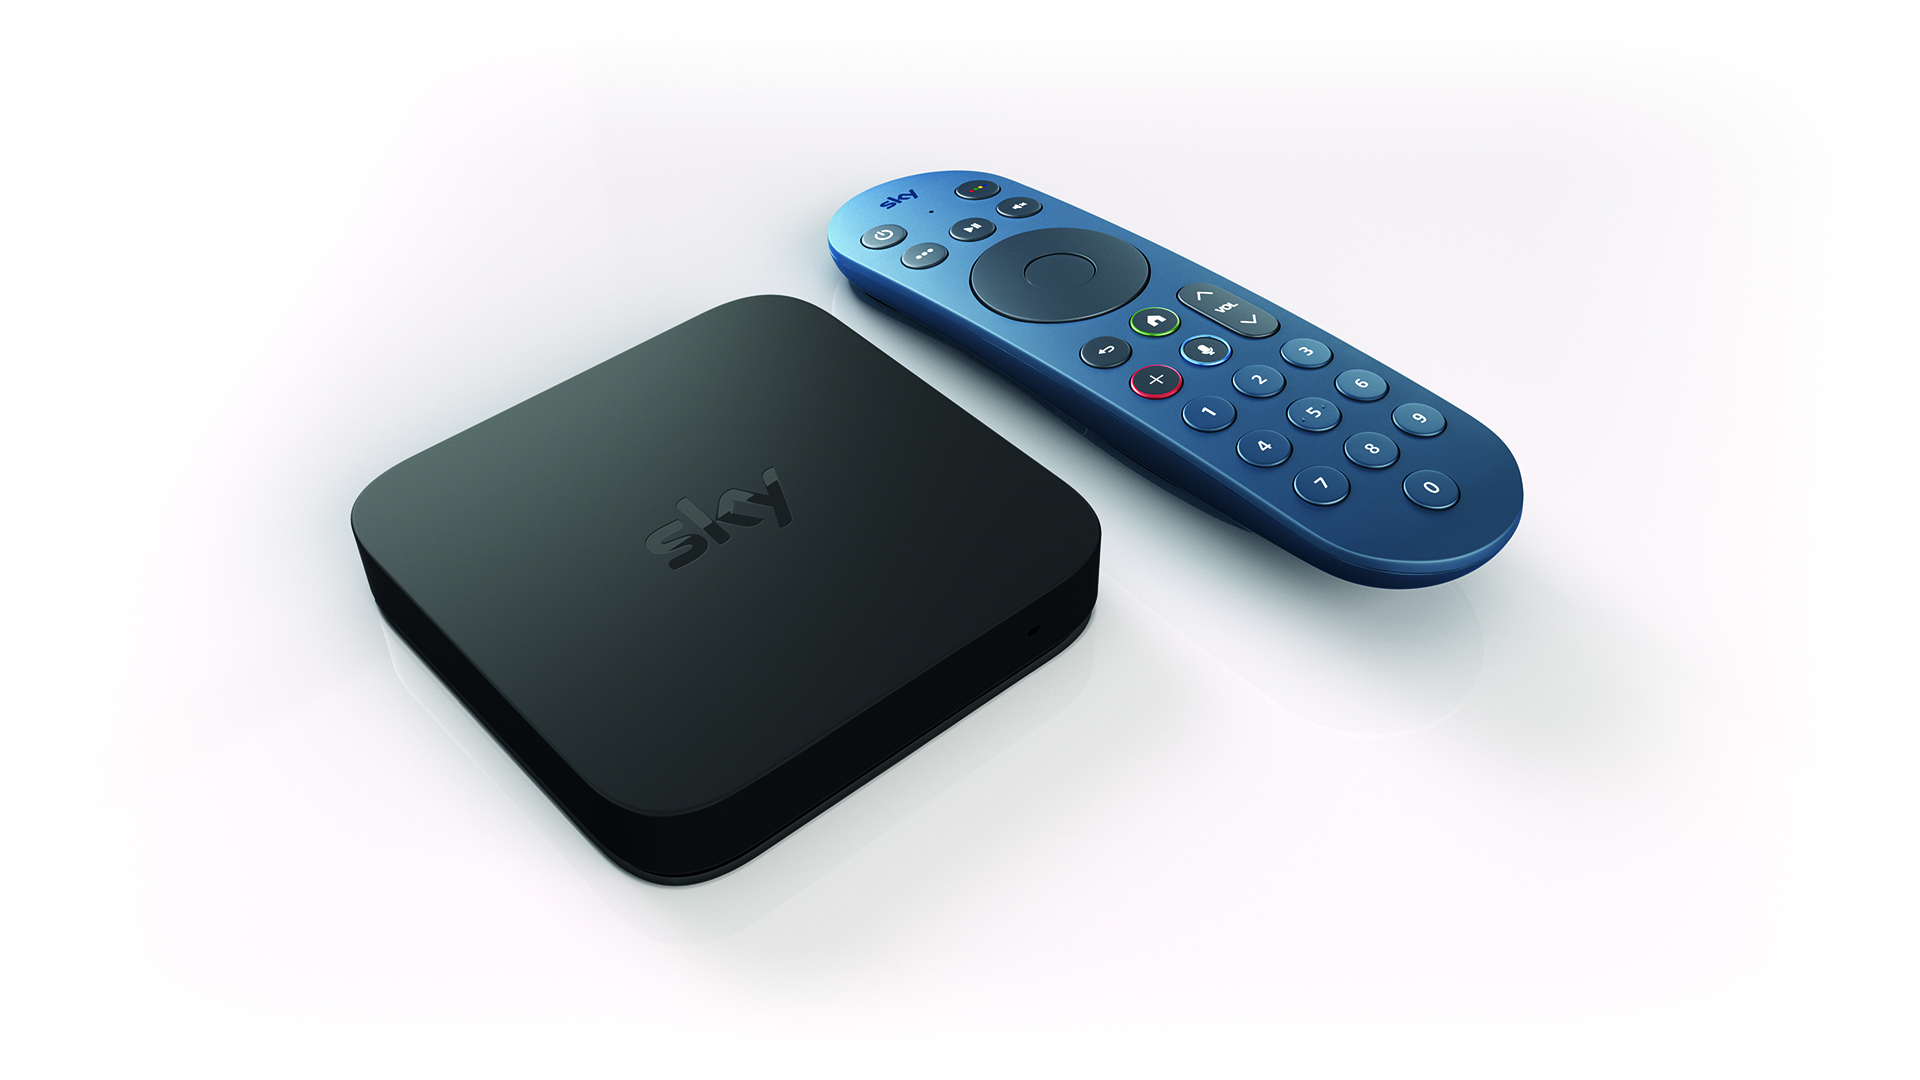 Sky Glass without the TV is coming soon thanks to the Sky Stream puck